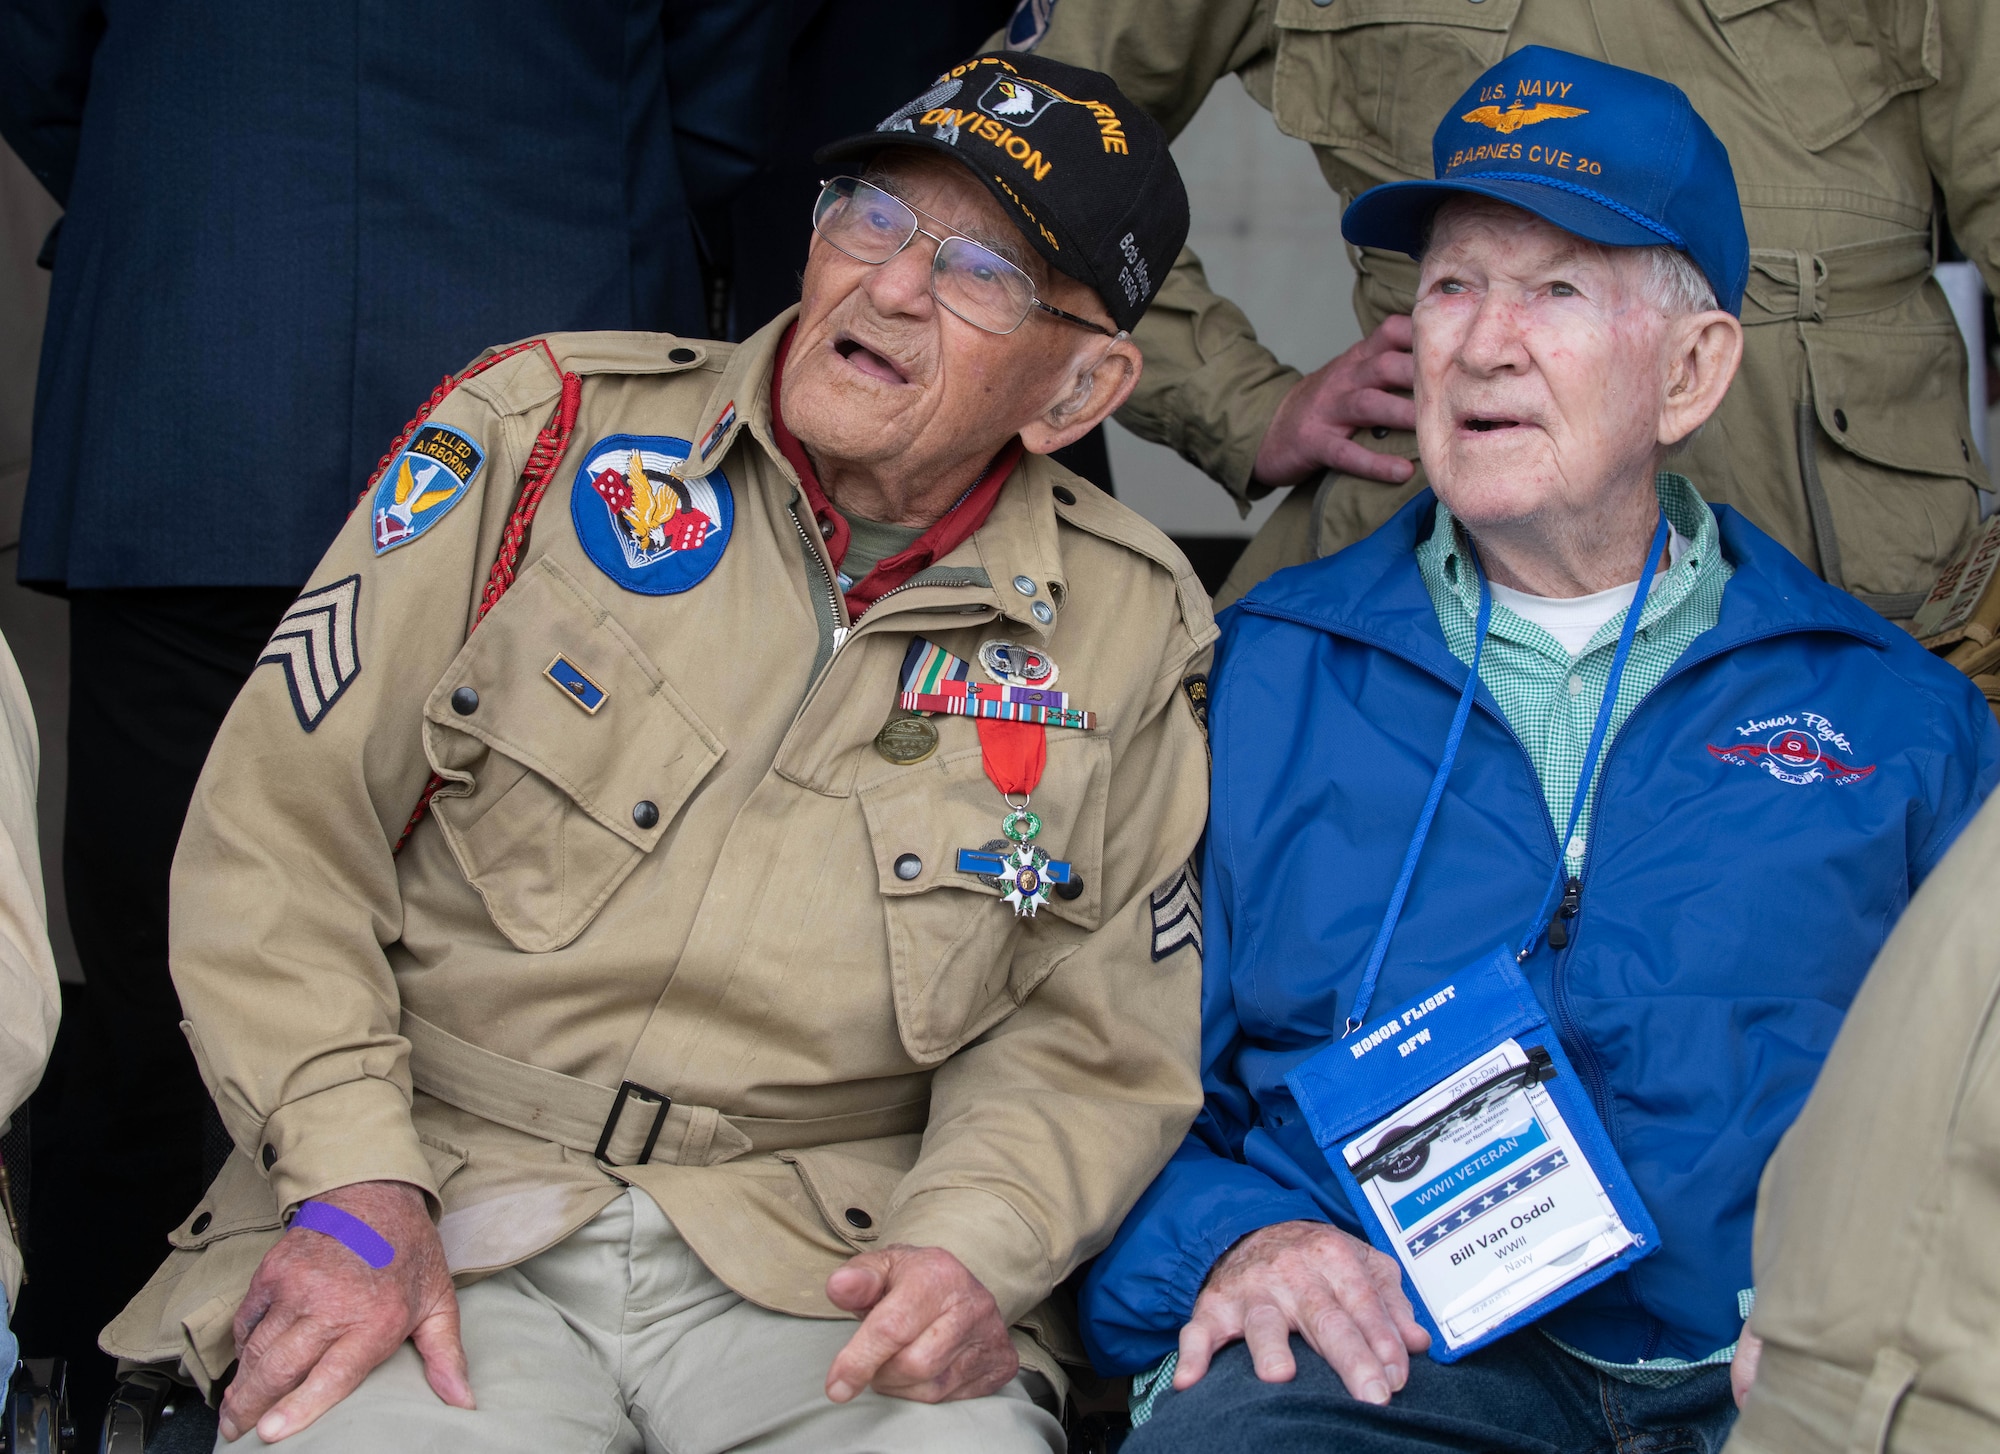 World War II veterans Robert Noody and Bill Van Osdol watch the aerial demonstration at the D-Day 75 Commemorative Airborne Operation in Sainte-Mere-Eglise, France, June 9, 2019, which honors the epic airborne operation conducted by Allied forces on June 6, 1944. This commemorative airborne operation was an opportunity for multinational forces to honor the past and simultaneously work to secure the future. Training together in the very same place that trans-Atlantic resolve began 75 years ago demonstrates the partnerships and bonds that we highly value and continue to benefit from to this day. (U.S. Air Force photo by Airman 1st Class Jennifer Zima)